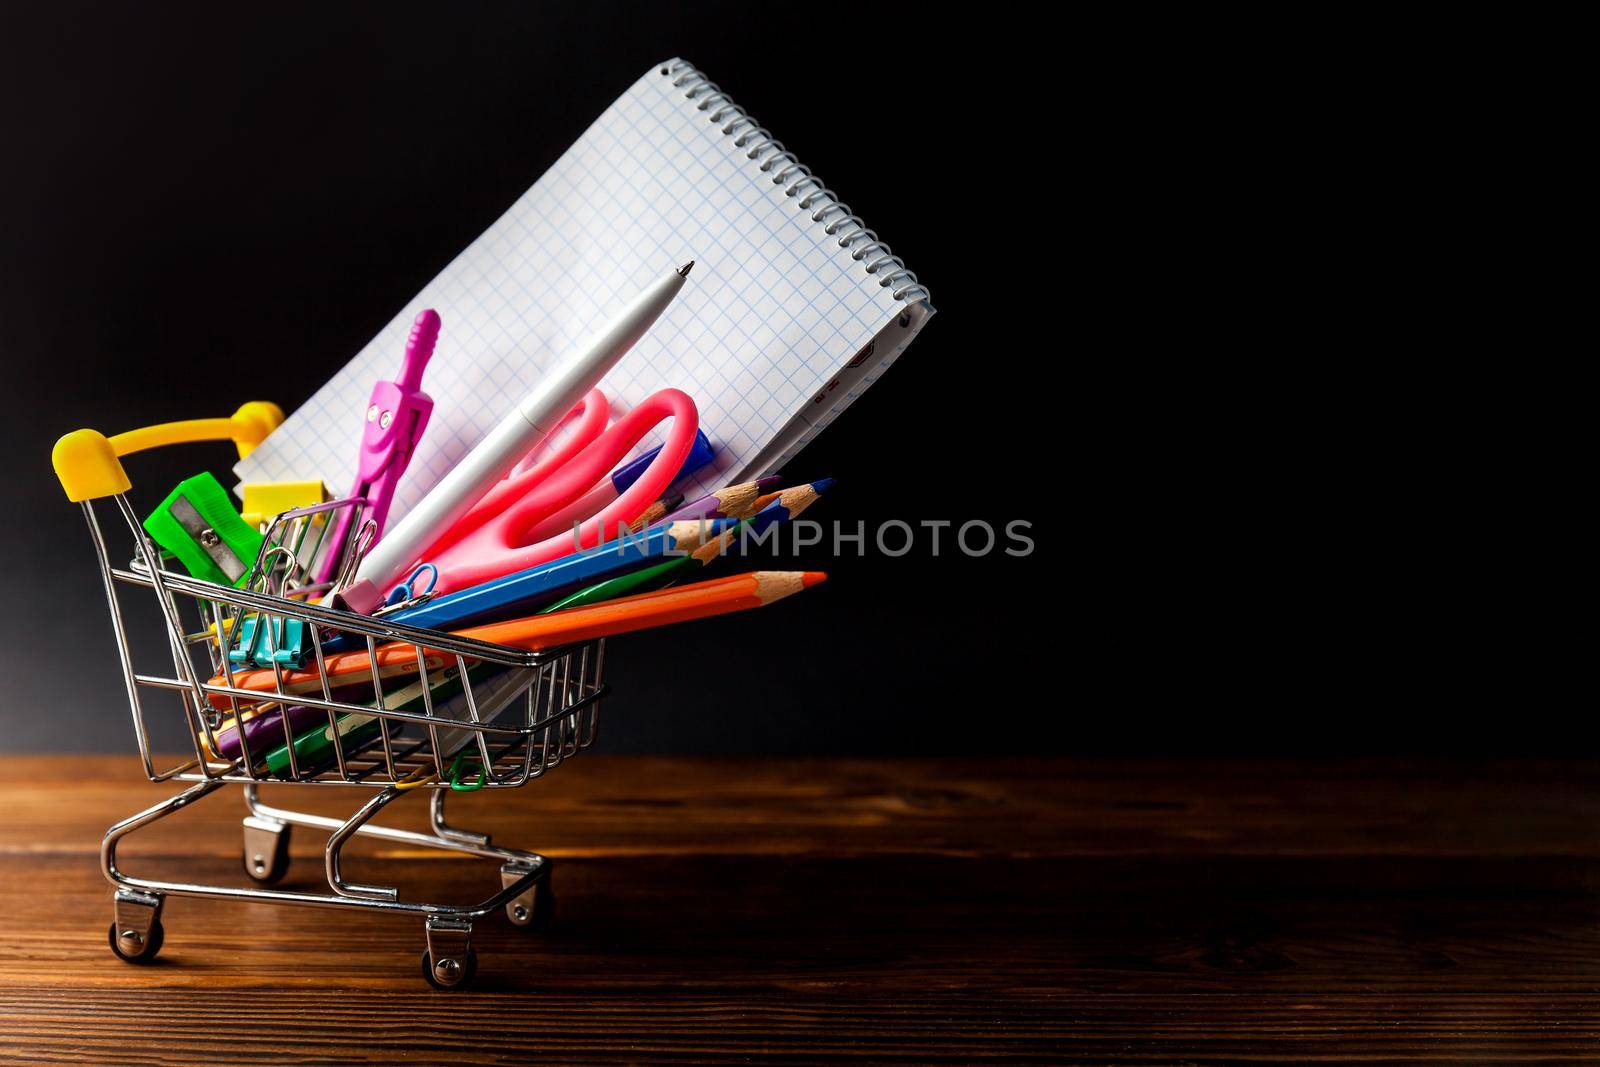 Shopping cart full of stationery or office supplies on dark background. Back to school concept.